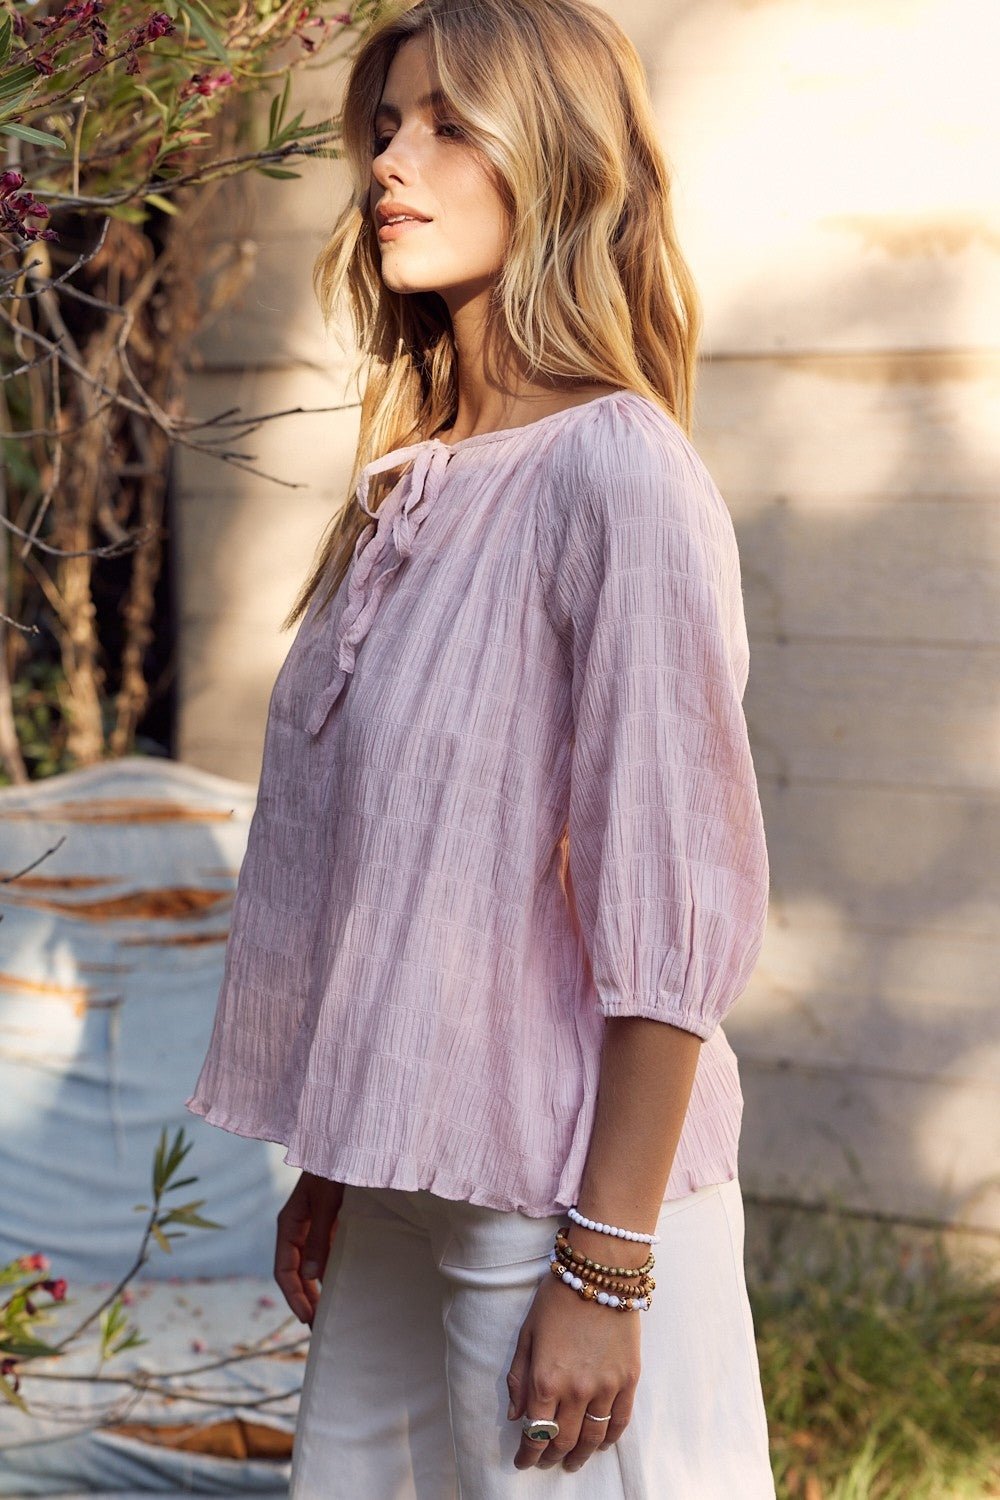 Textured Tie Neck Blouse in Dusty PinkBlouseIN FEBRUARY